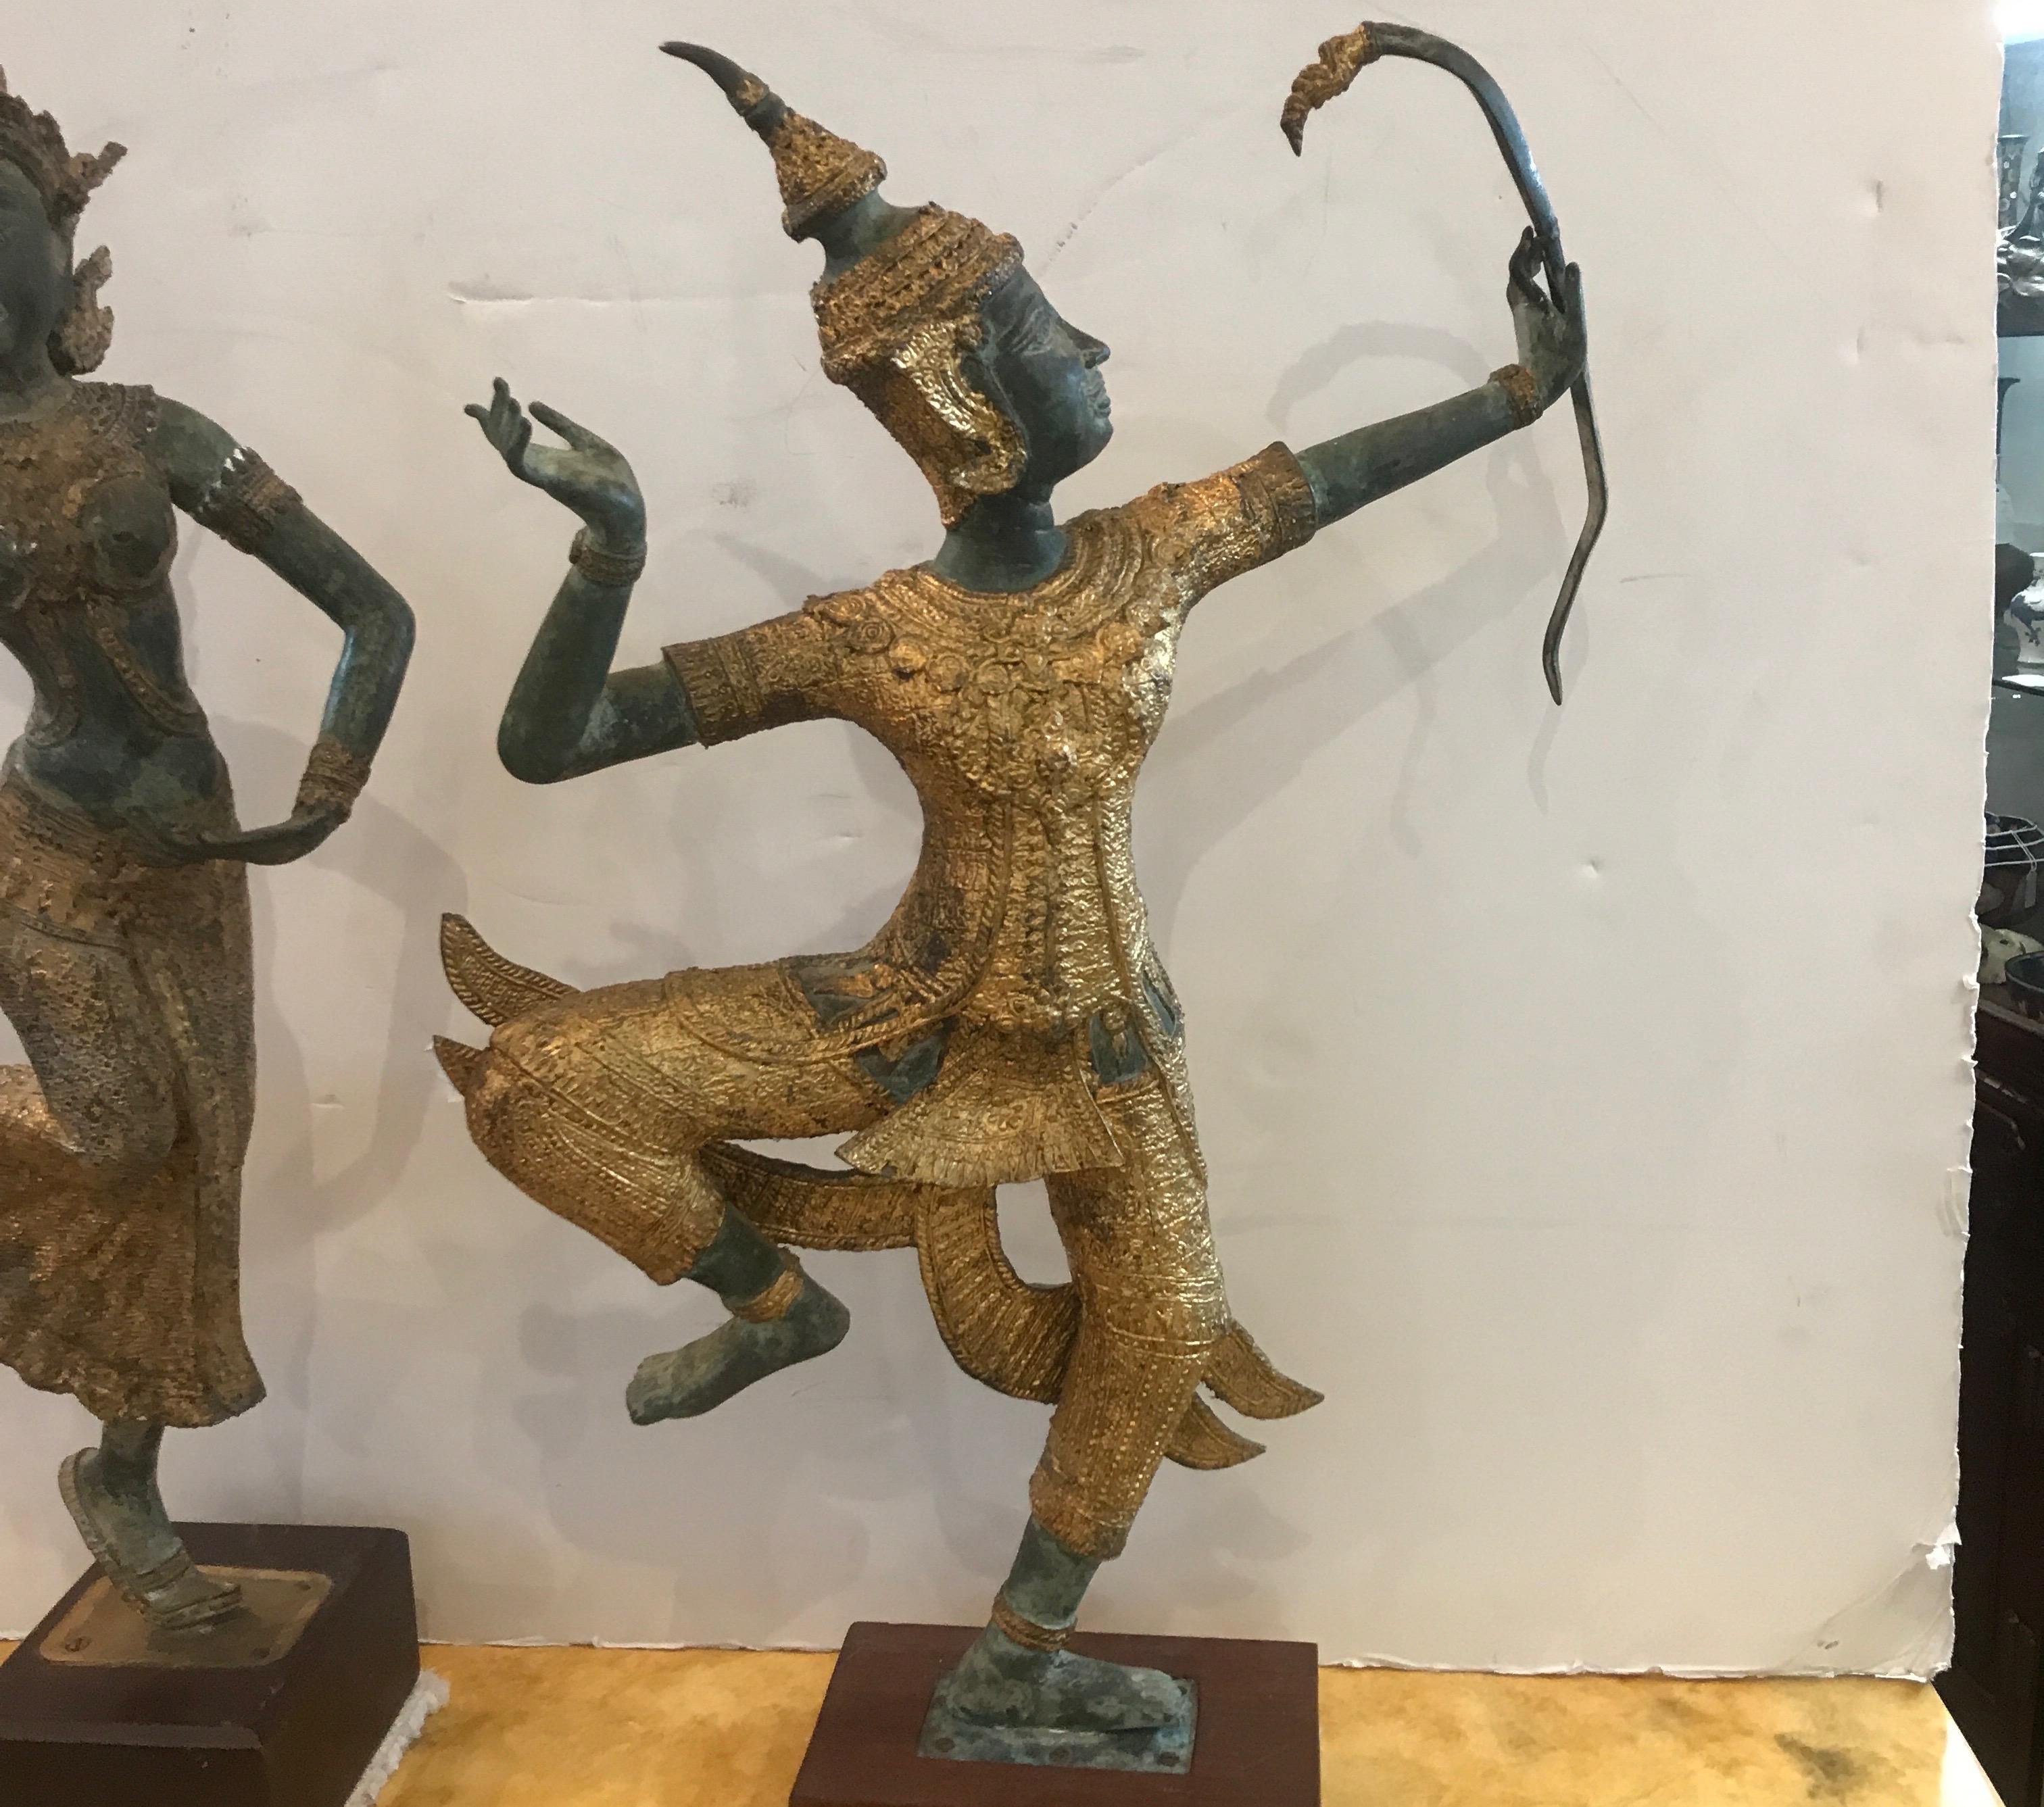 A pair of bronzed gilt and patinated Thai sculptures on hardwood bases. The exotic figures in an aged Verdi patination with the clothing in gold, early to mid 20th century. The highly figuratively posed figures one a female dance, the other a male